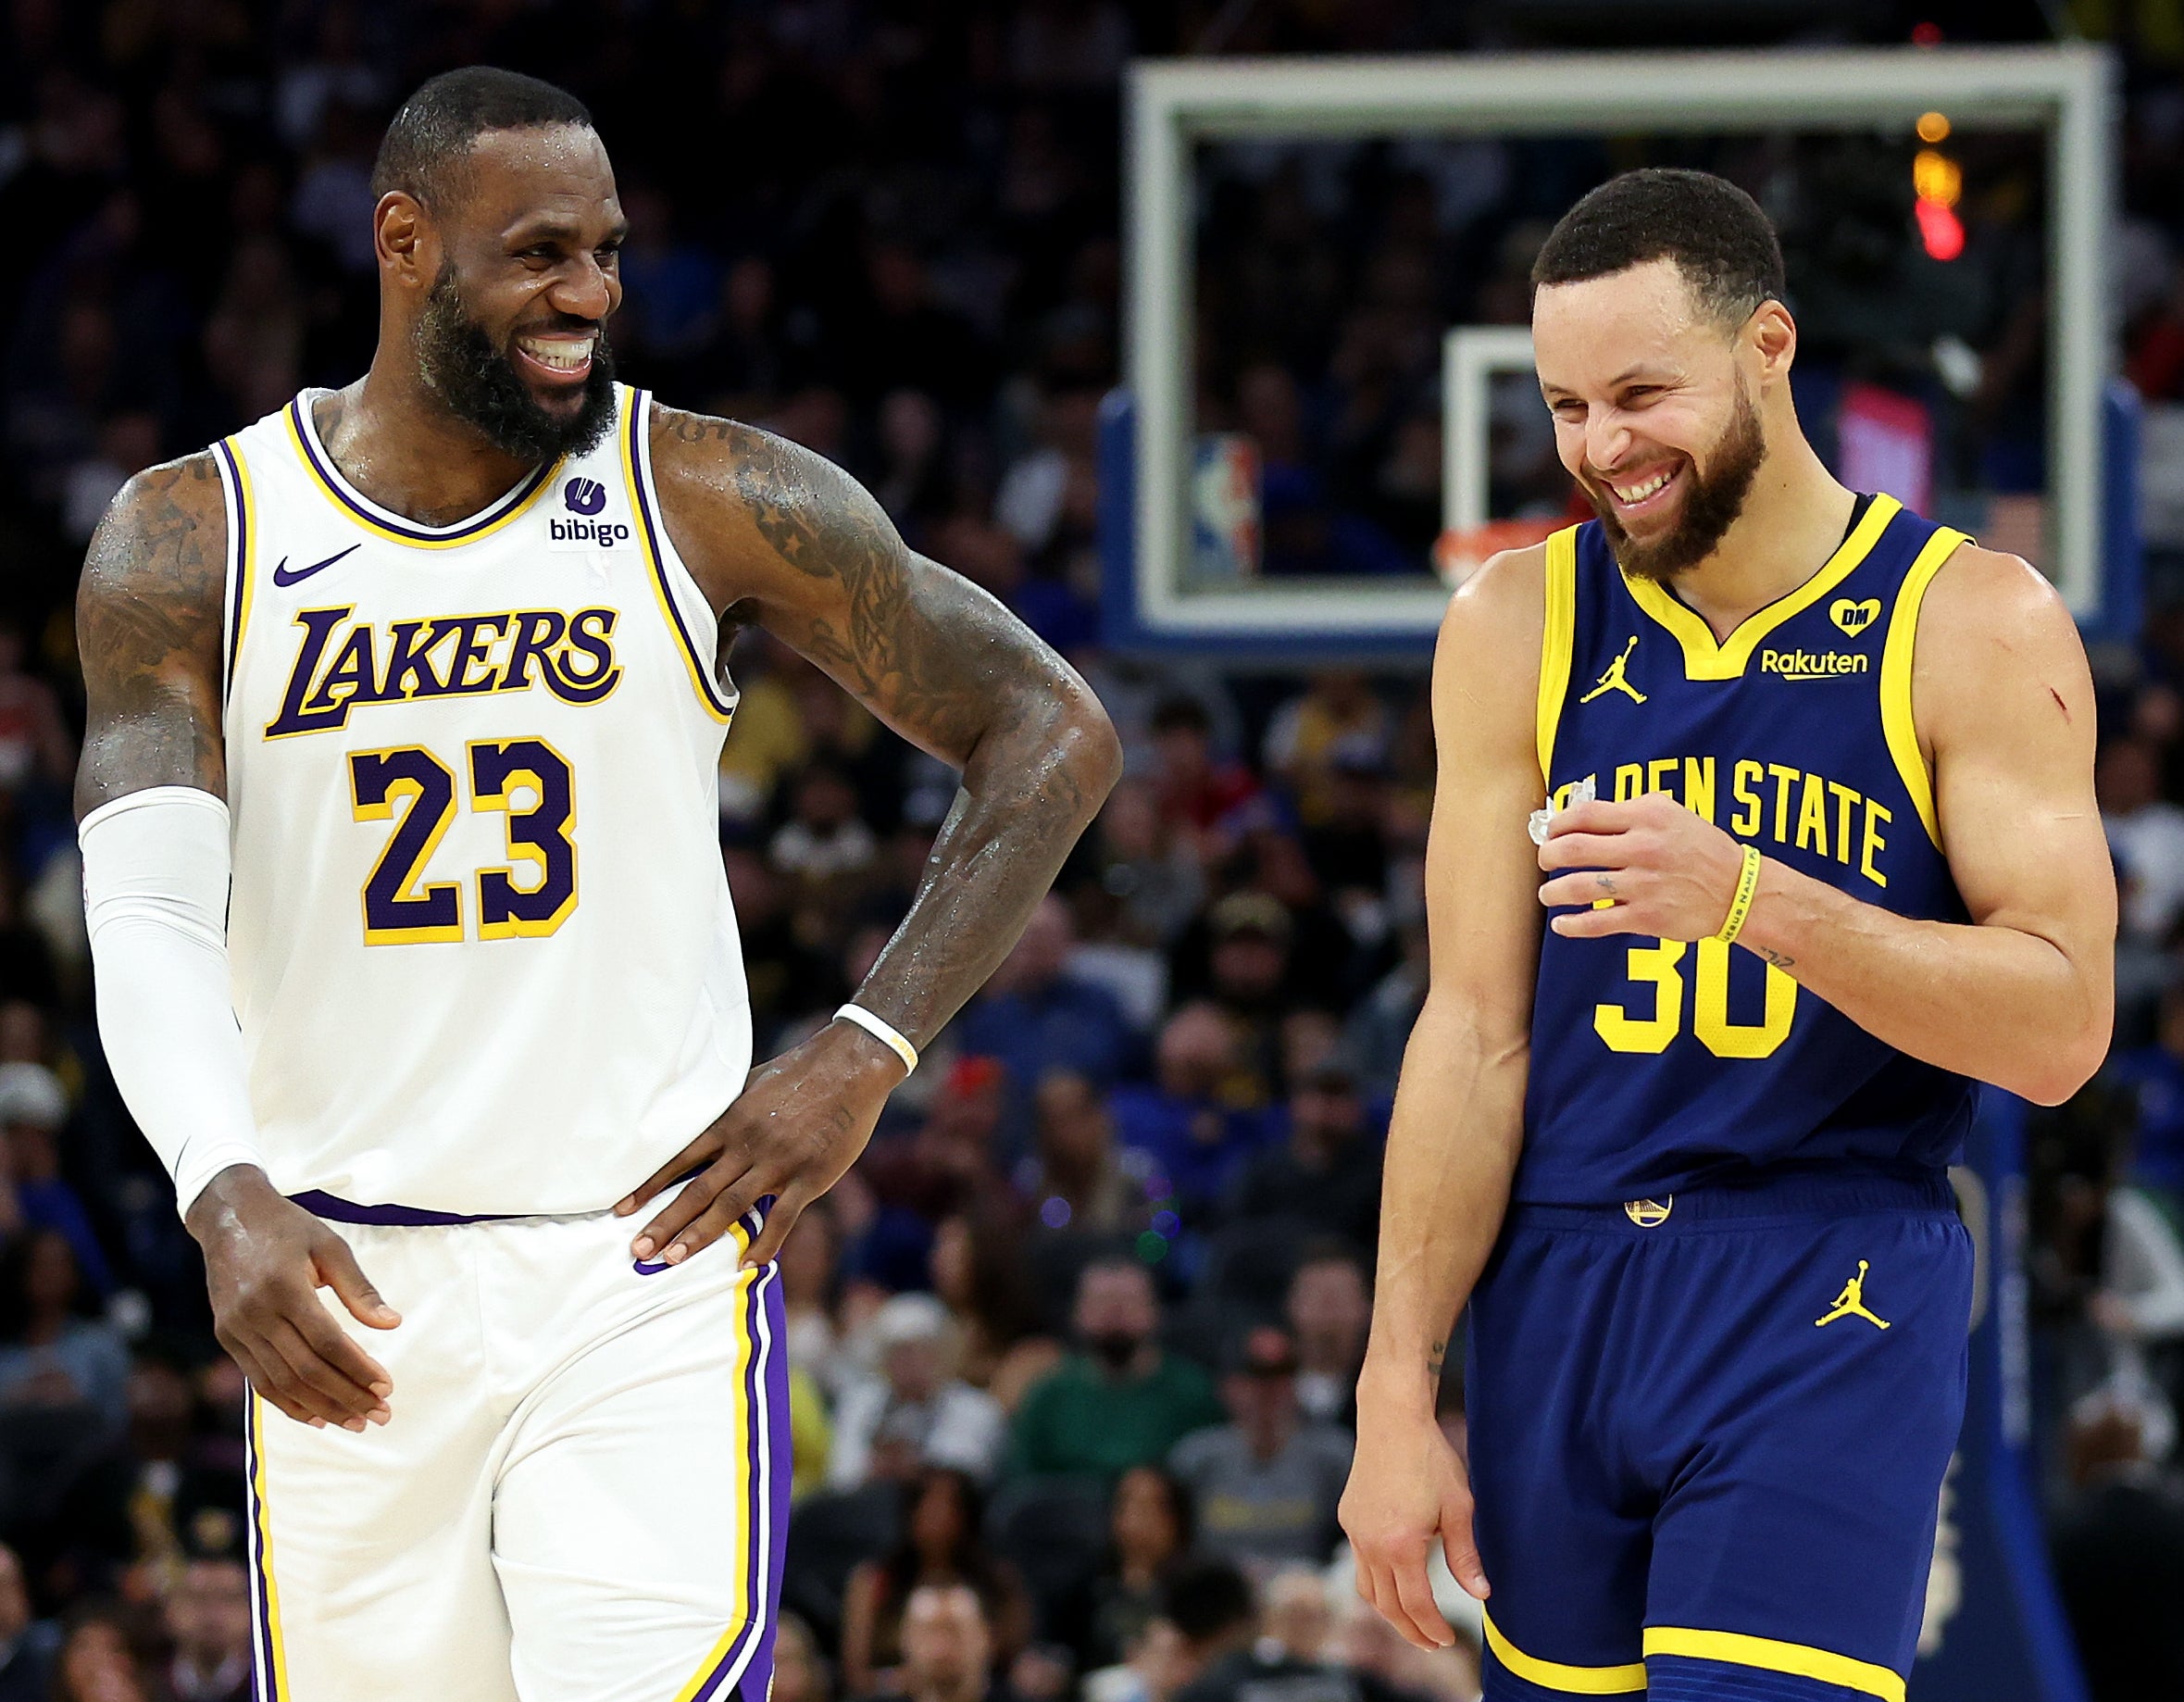 LeBron James and Stephen Curry share a laugh on the basketball court